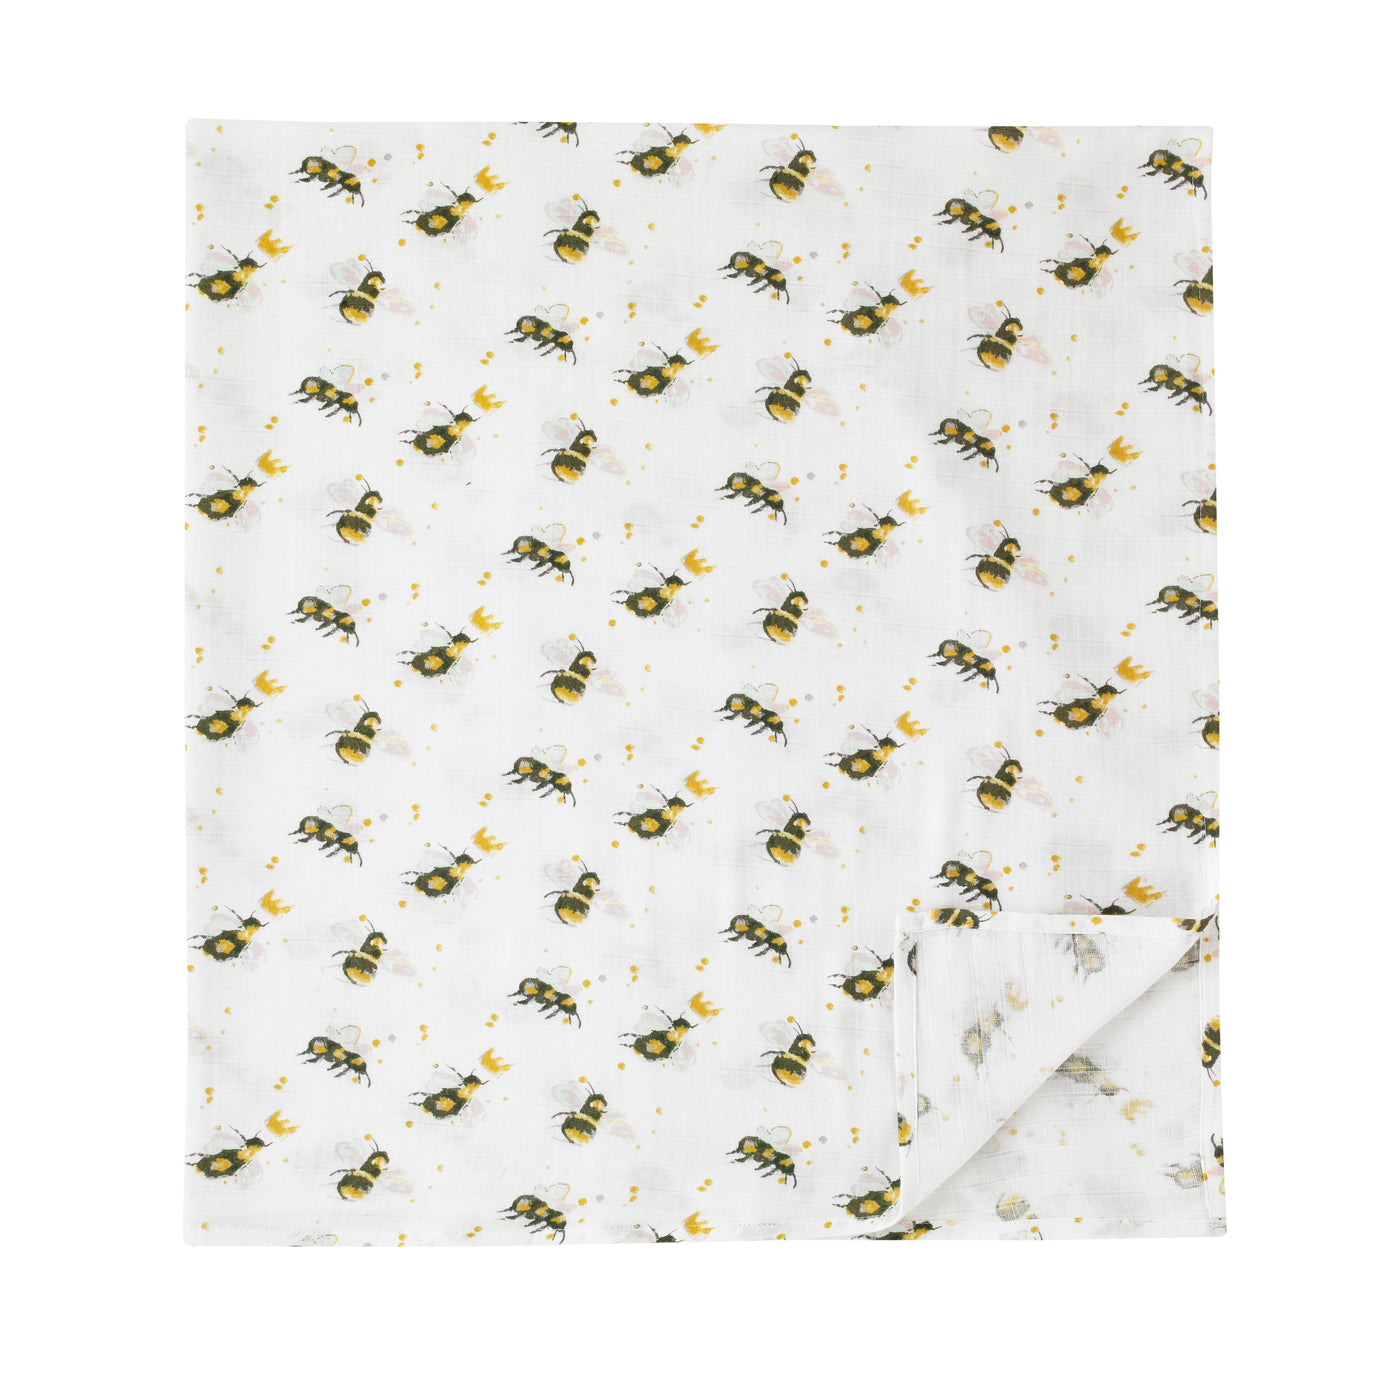 flat shot of cotton swaddle cloth, white base with water colour bee pattern wit crown detailing, bees are in flight in alternating directions